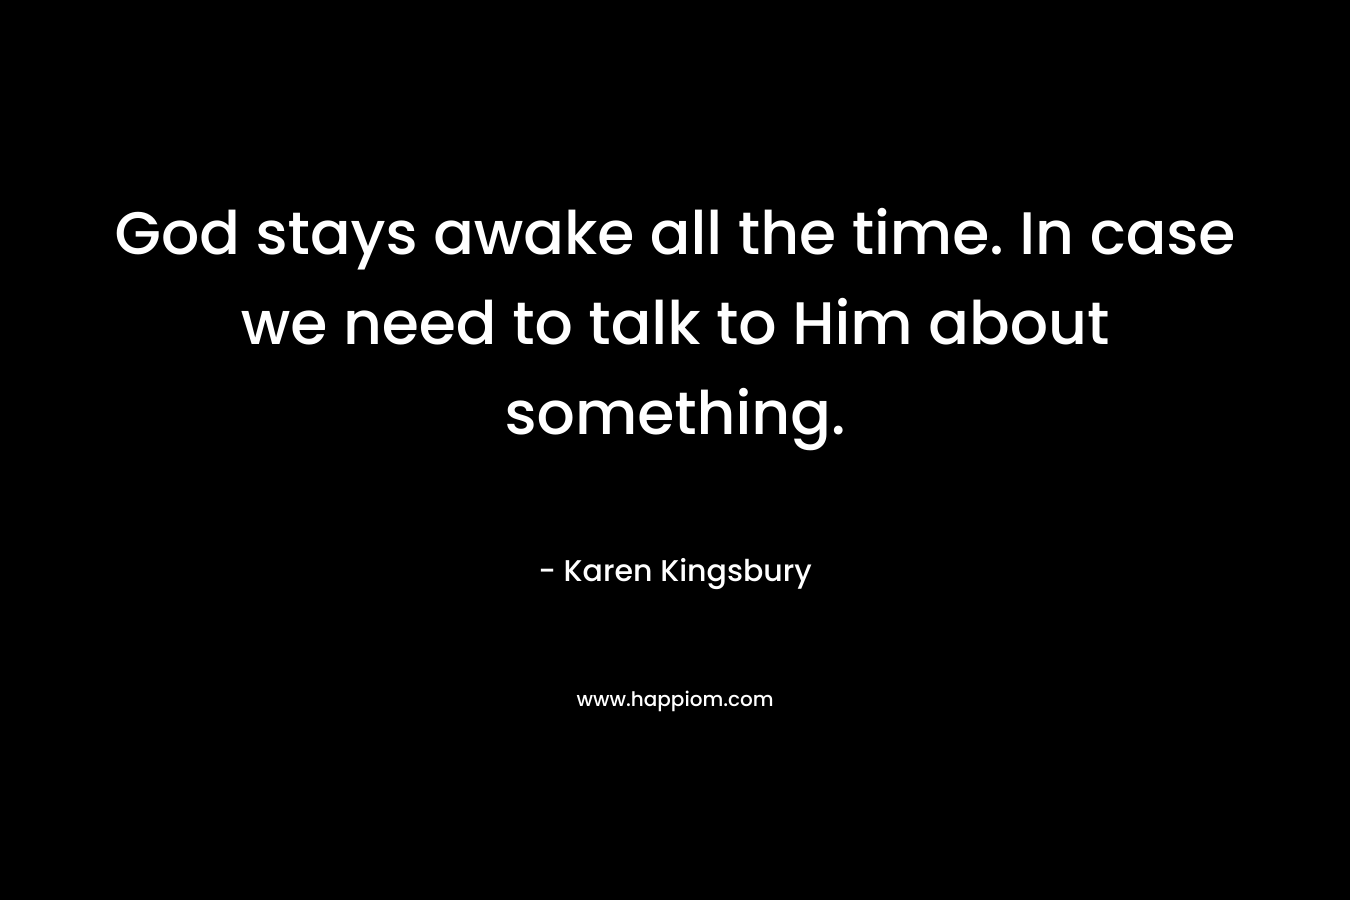 God stays awake all the time. In case we need to talk to Him about something. – Karen Kingsbury